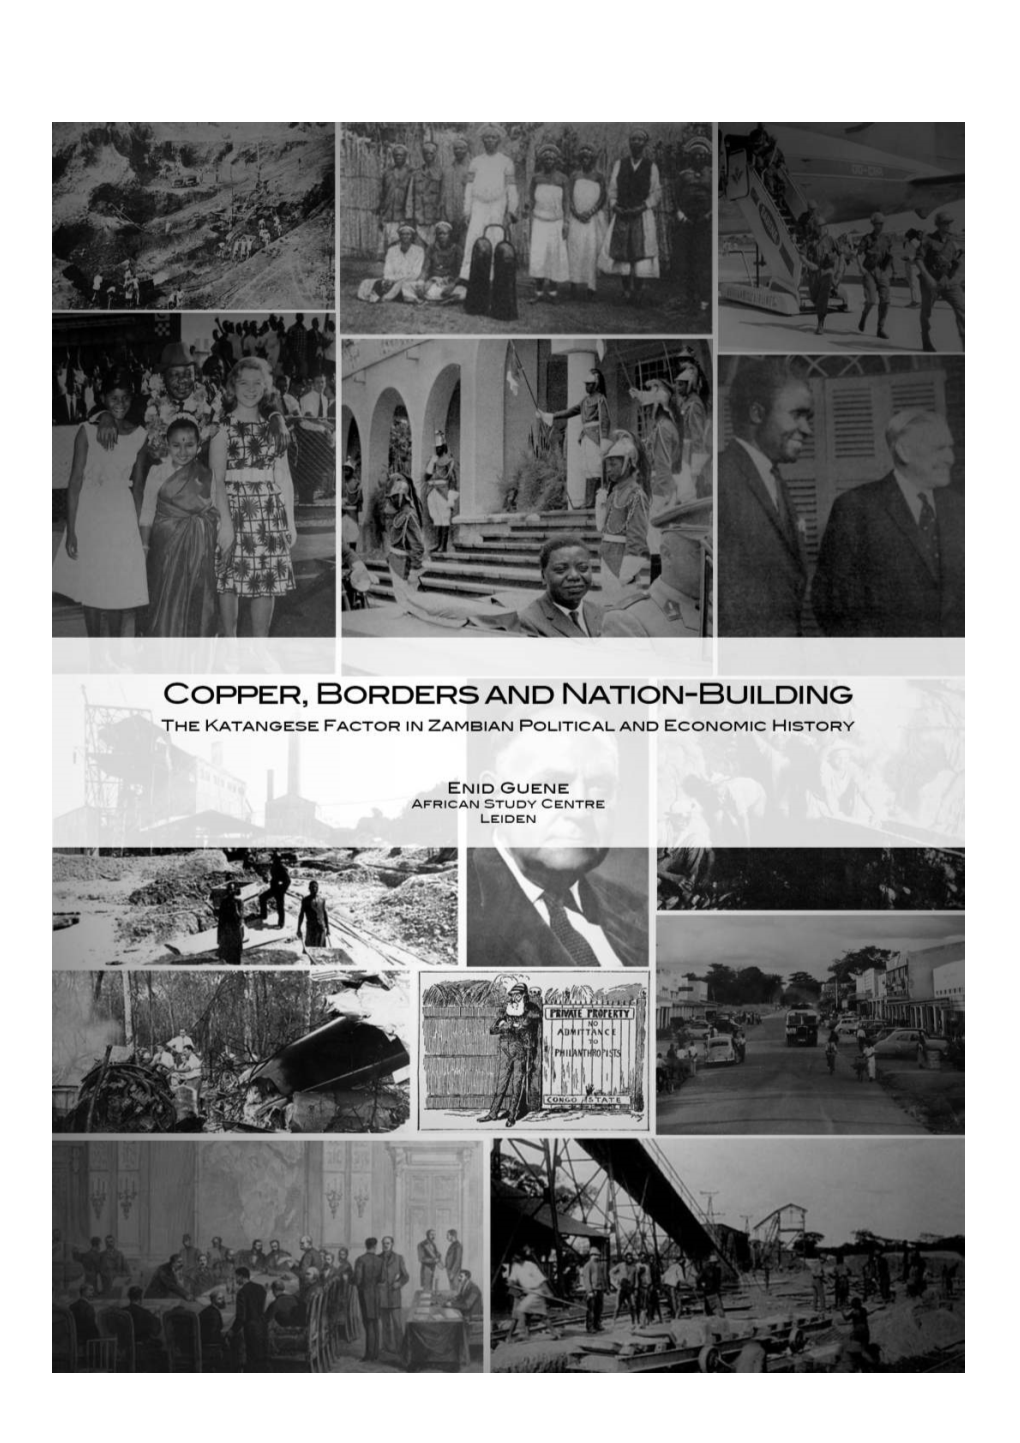 " Copper, Borders and Nation-Building": the Katangese